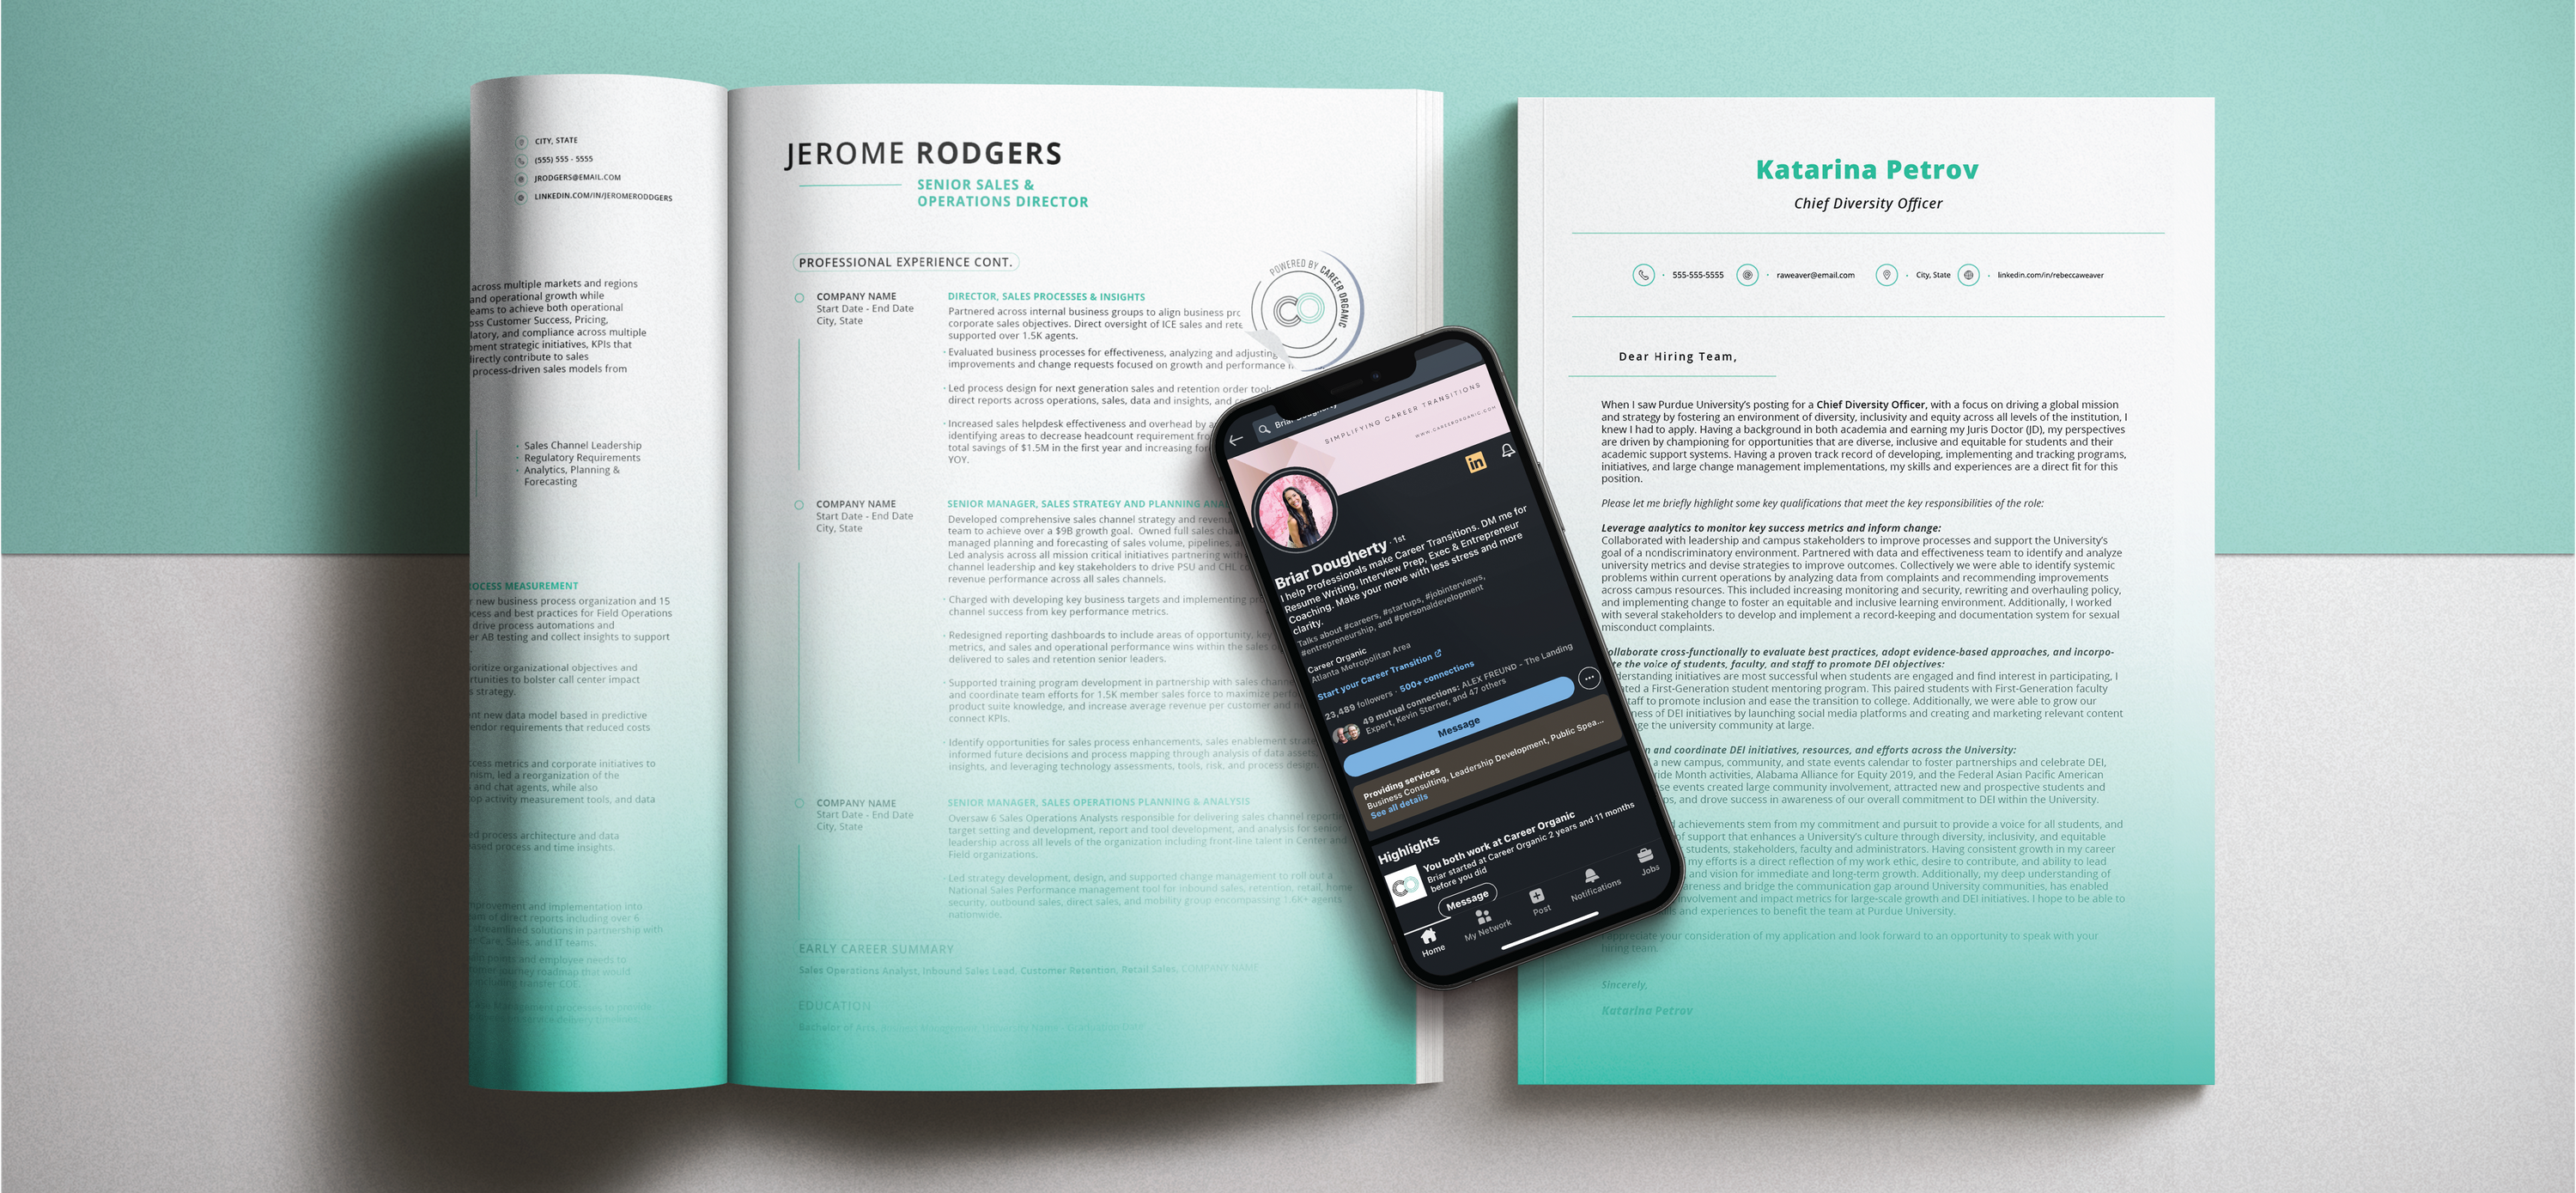 A resume, cover letter and LinkedIn bundle for executives.